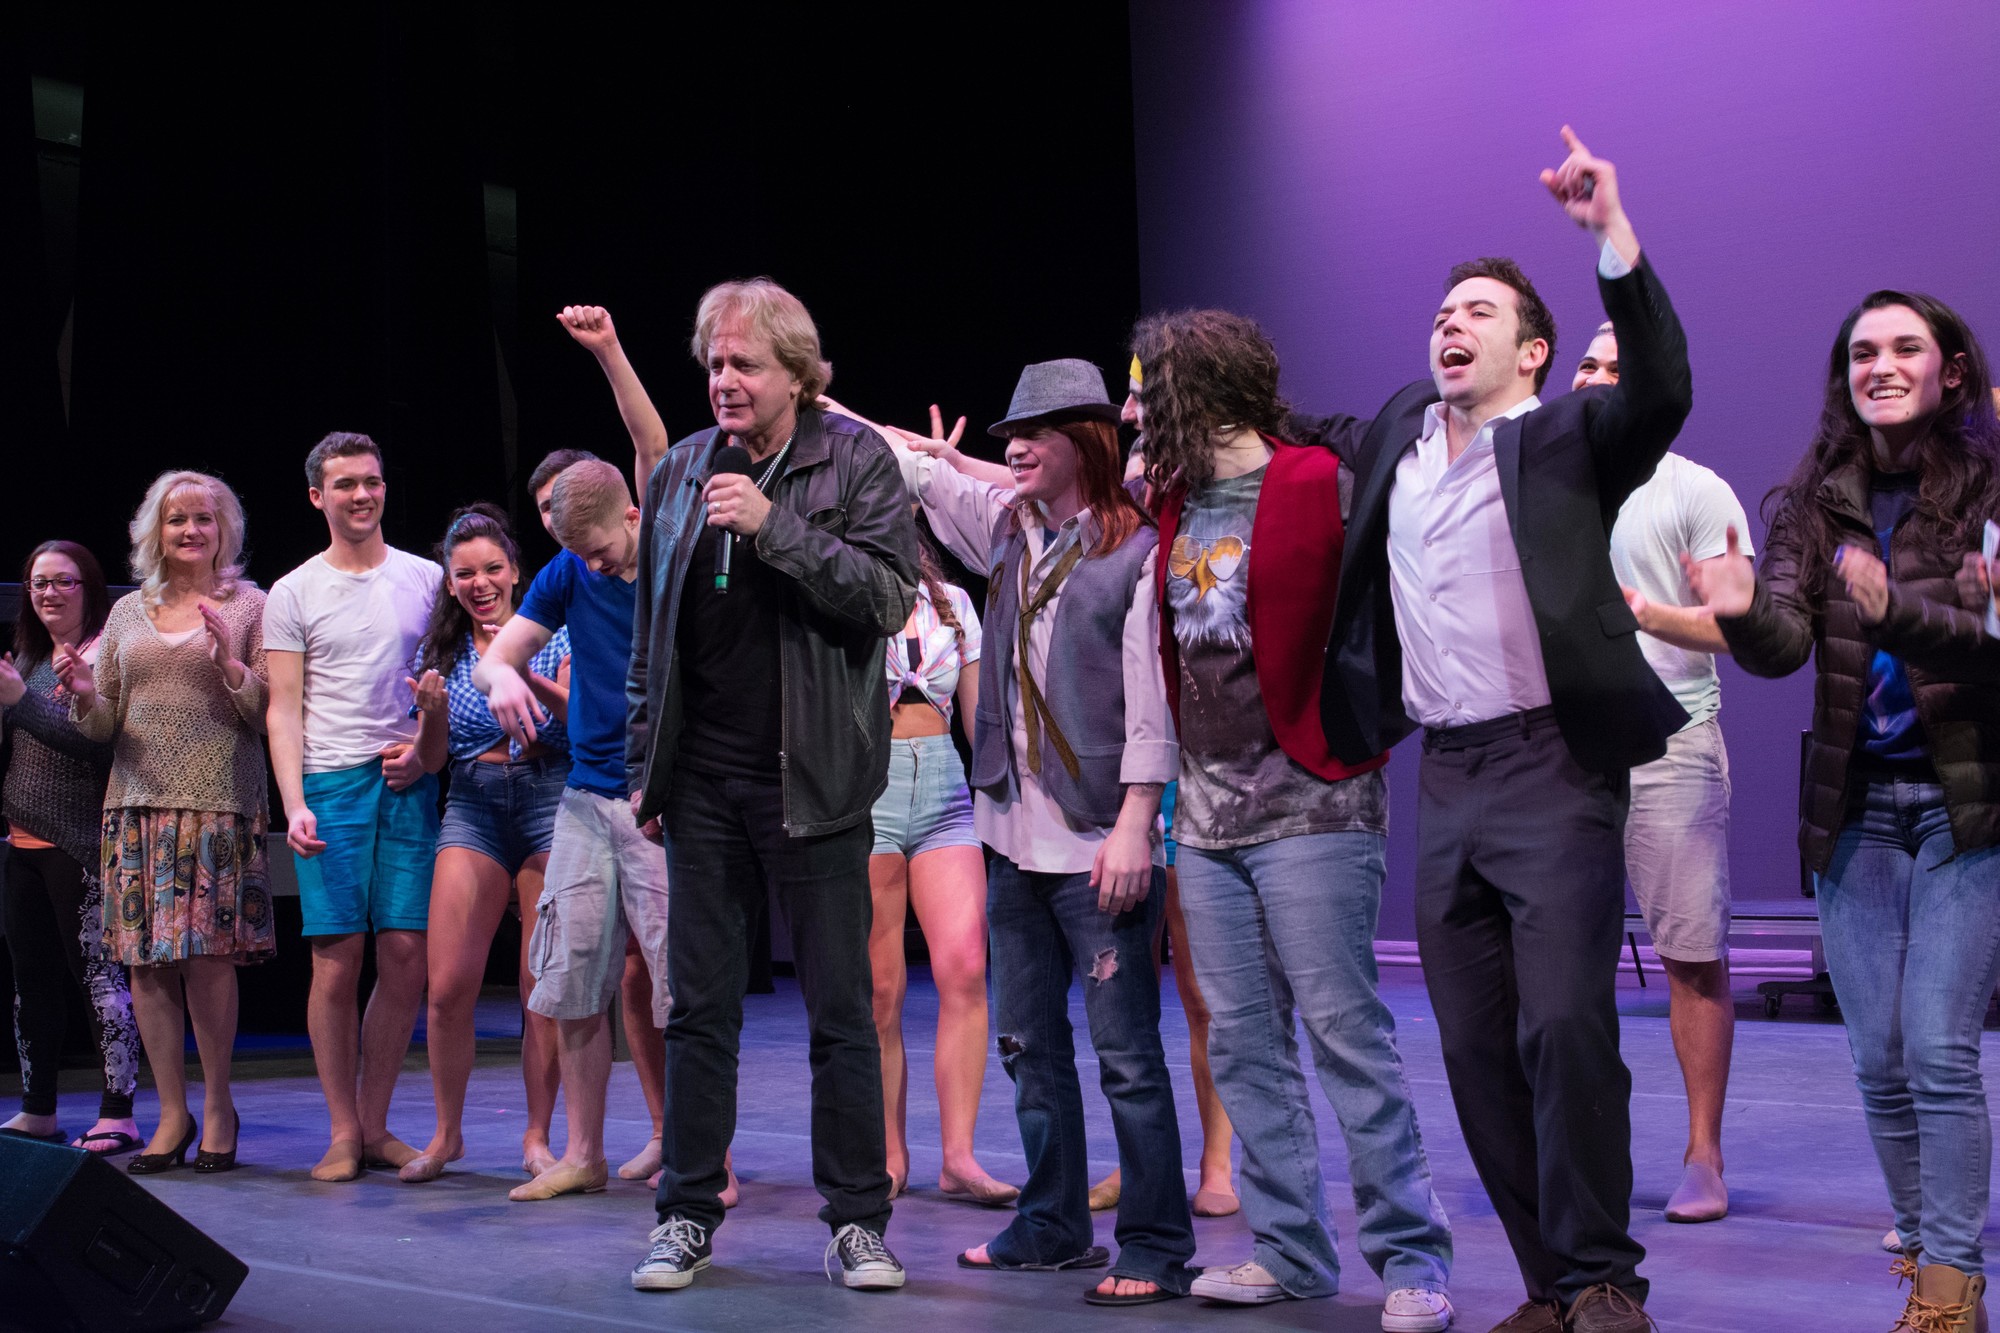 Eddie Money and The Cast of “Two Tickets to Paradise” hit the Molloy College stage for two performances last weekend.